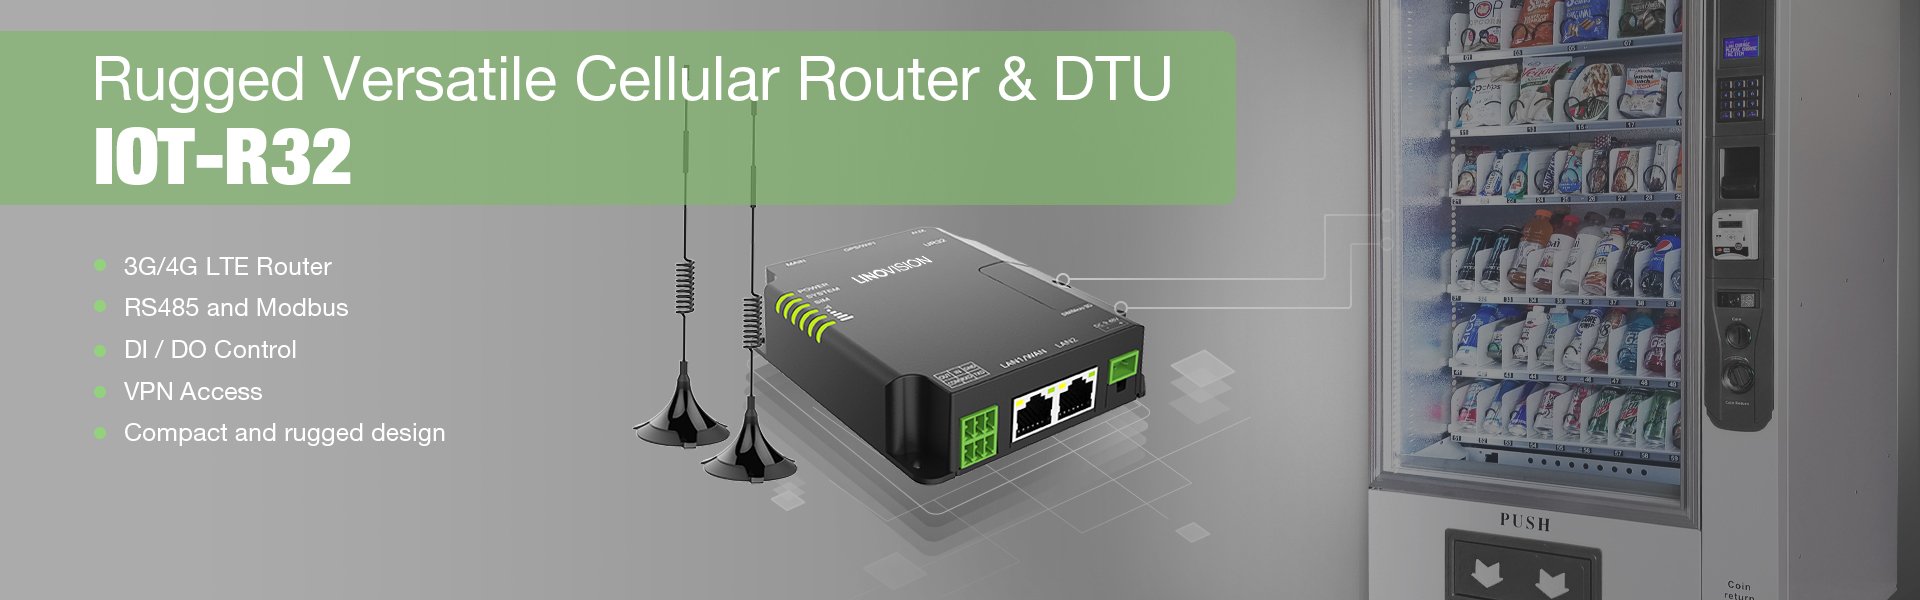 rugged and affordable 4G LTE cellular router